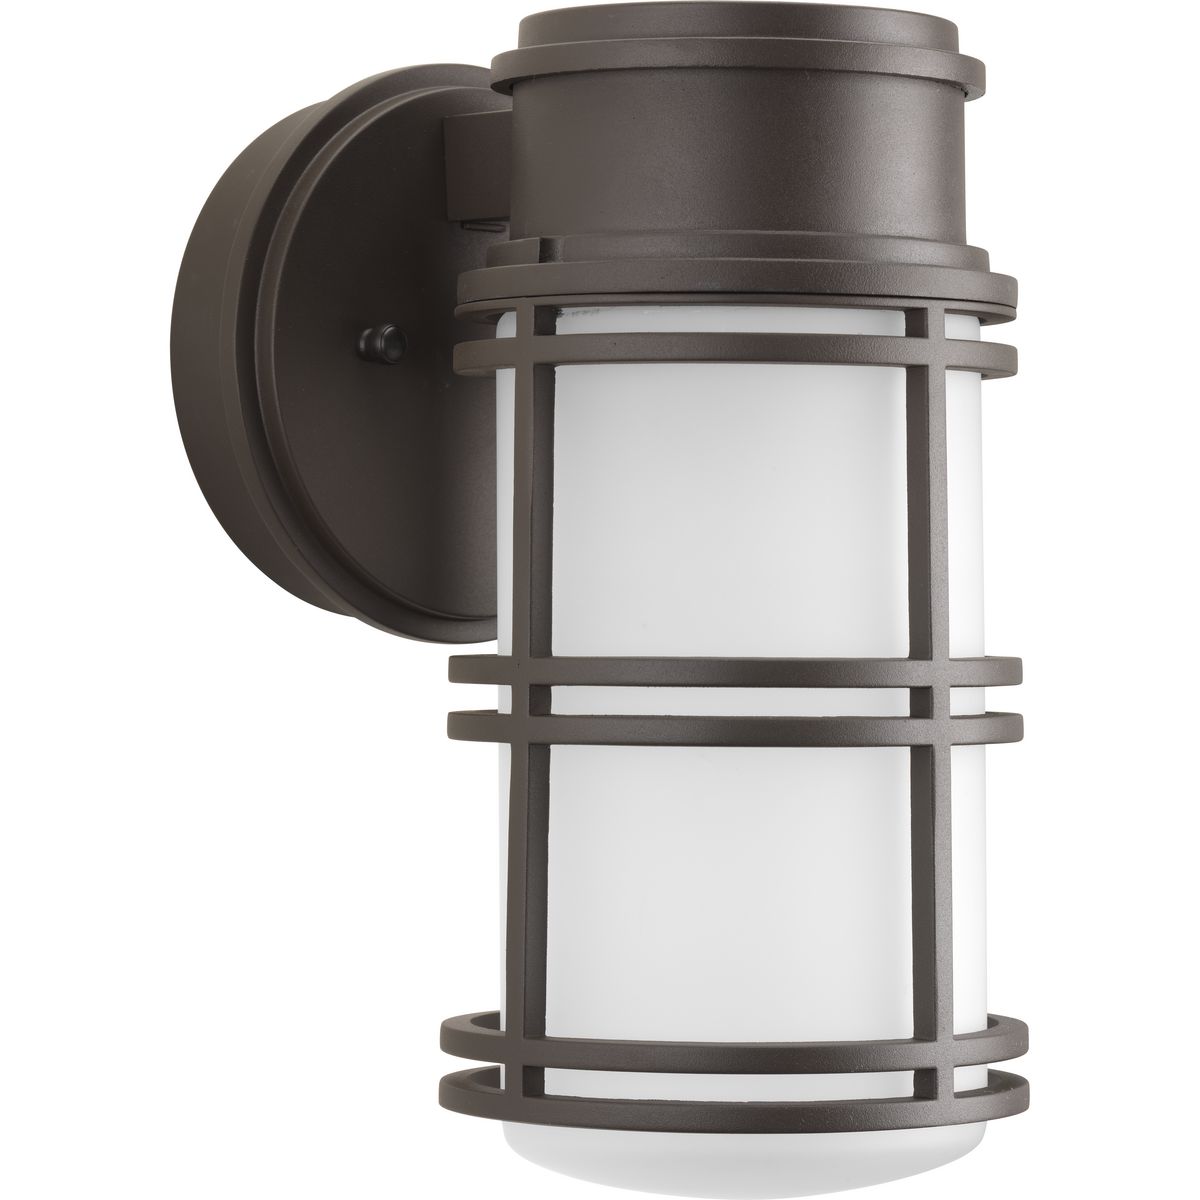 Bell LED Outdoor Wall Light